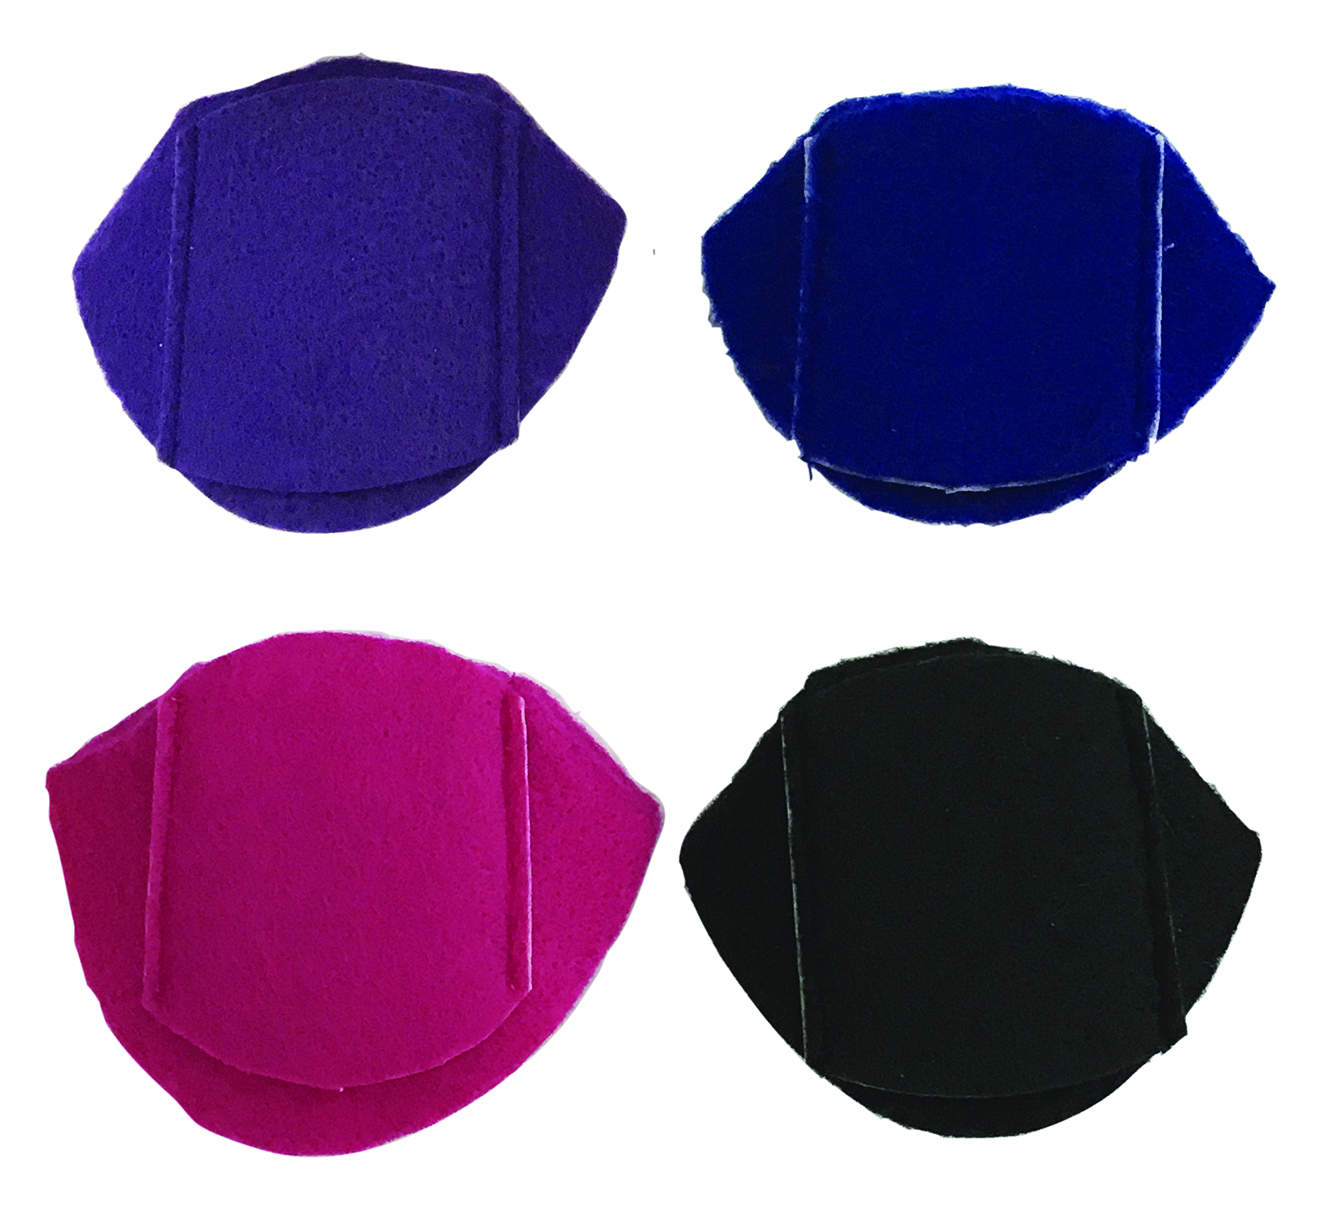 Soft XL over-the-lens eye patch